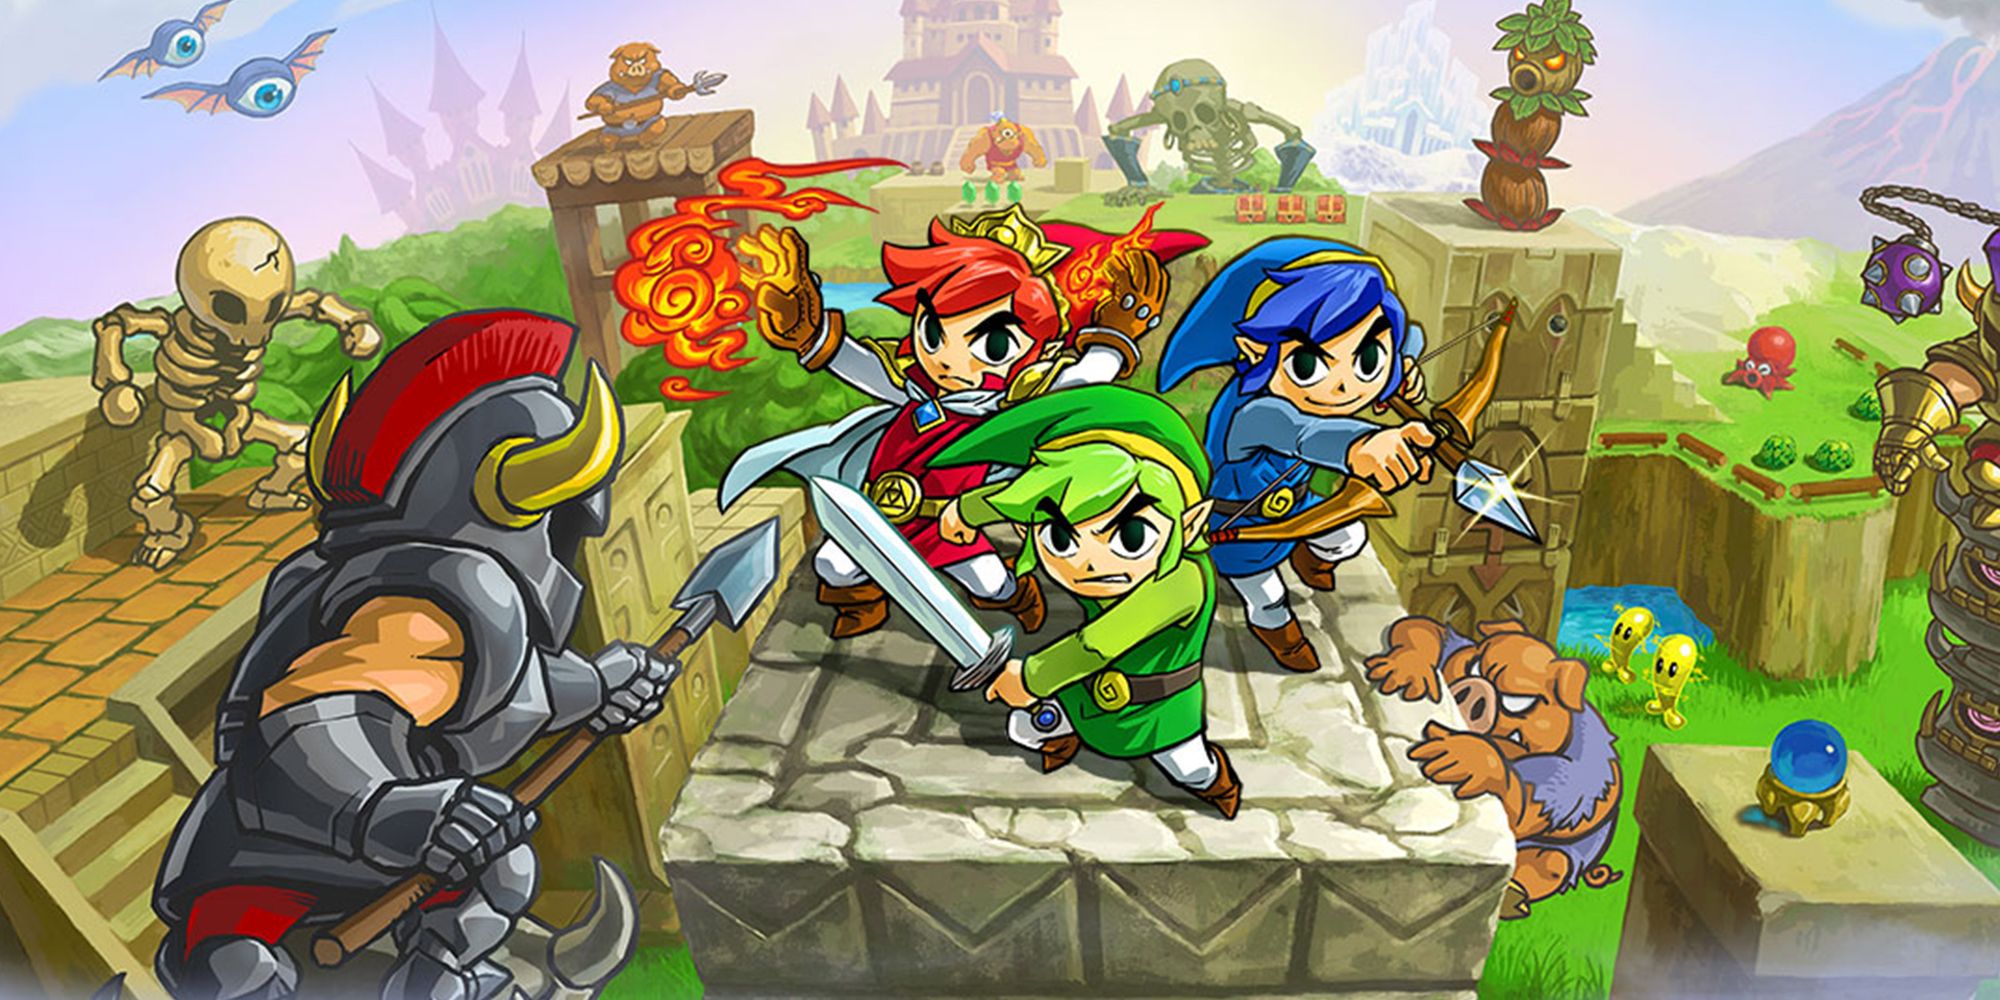 Three Links surrounded by enemies in official box art for The Legend Of Zelda TriForce Heroes